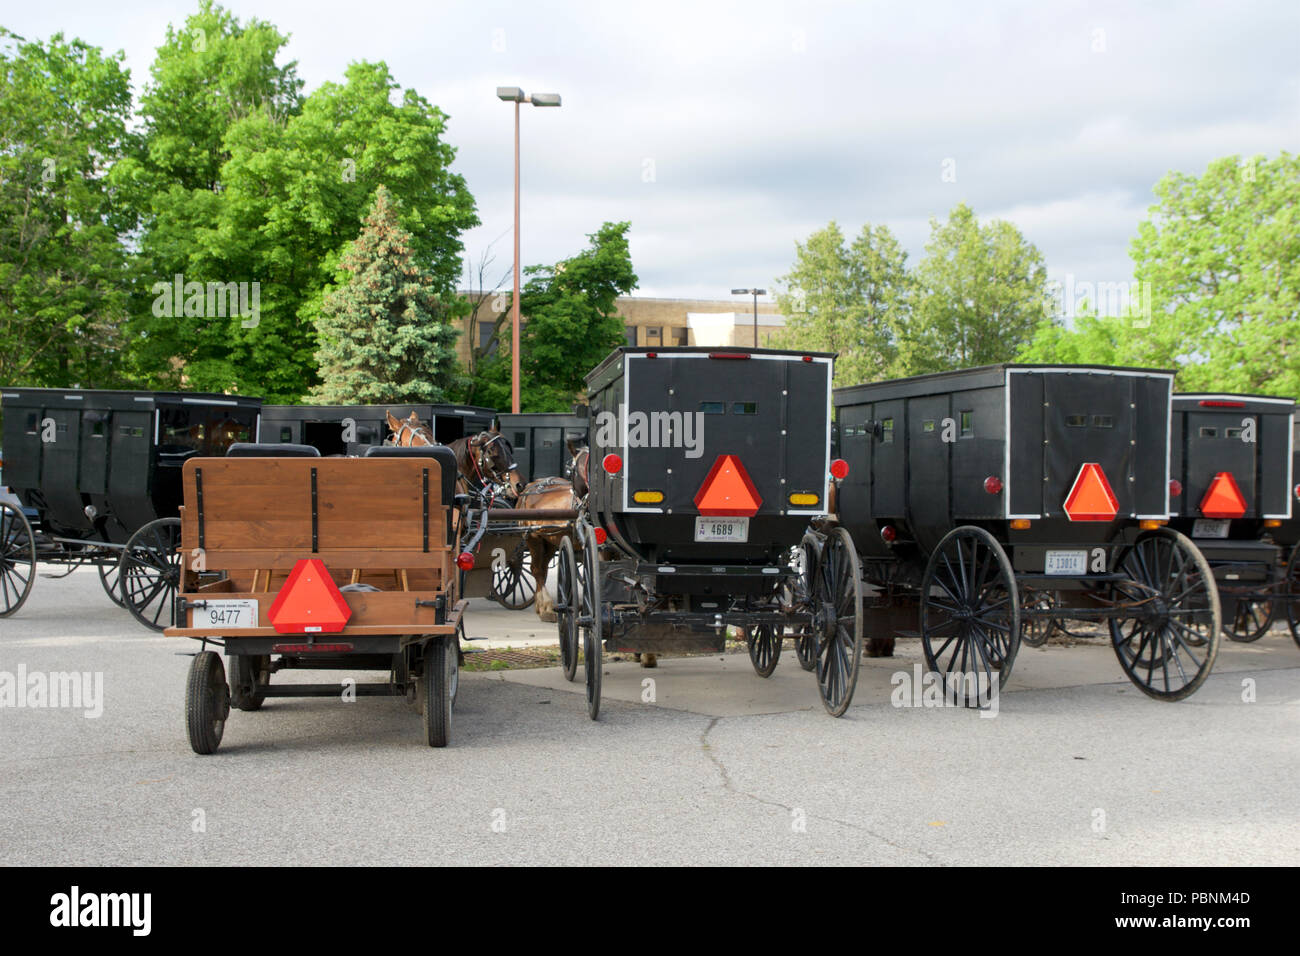 MIDDLEBURY, INDIANA, UNITED STATES - MAY 22nd, 2018: View of amish carriage along the city, known for simple living with touch of nature contacy, plain dress, and reluctance to adopt conveniences of modern technology Stock Photo